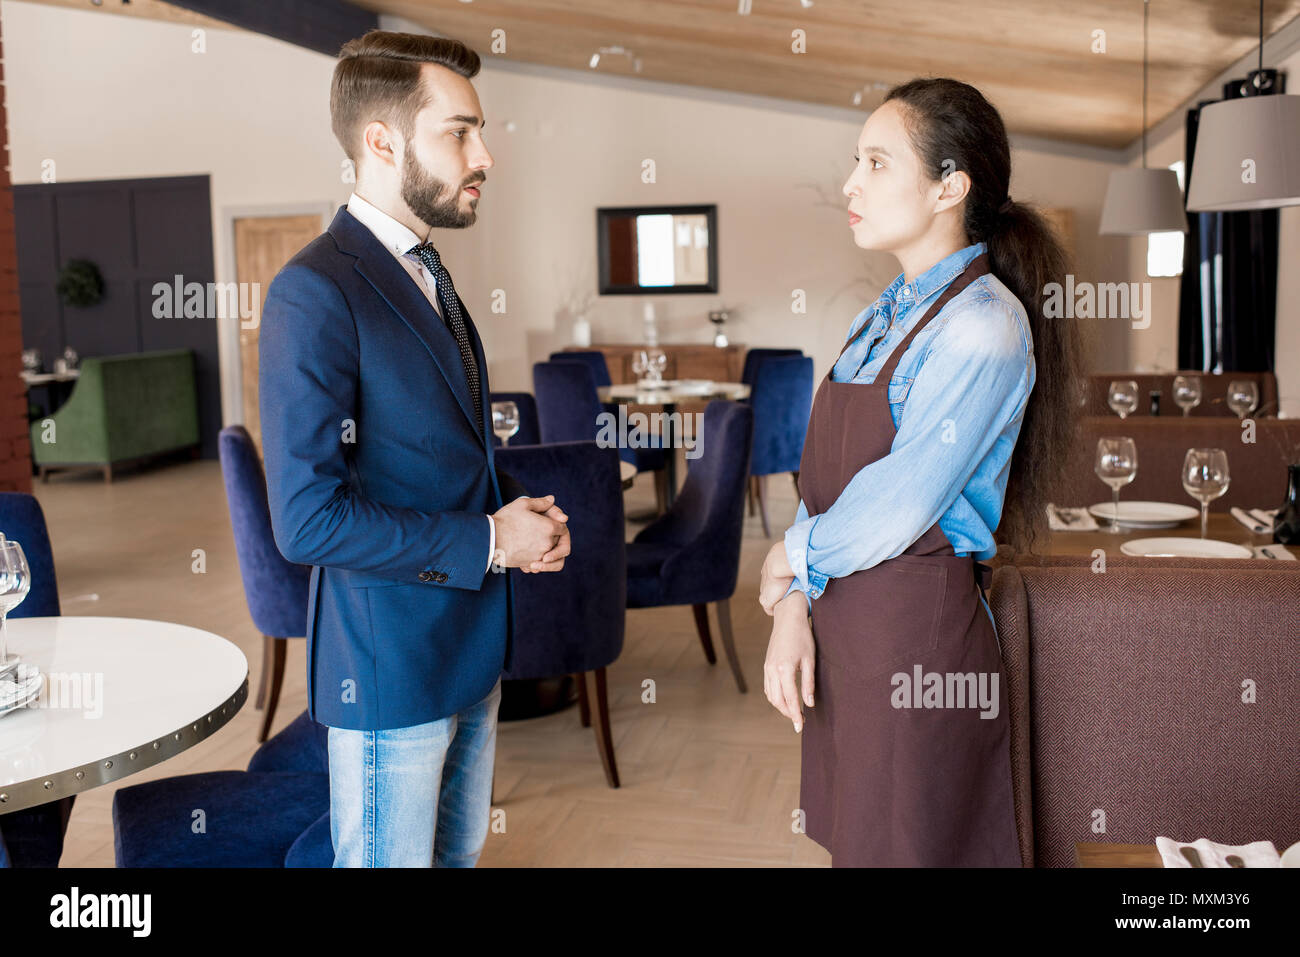 Restaurant manager working with service personnel Stock Photo